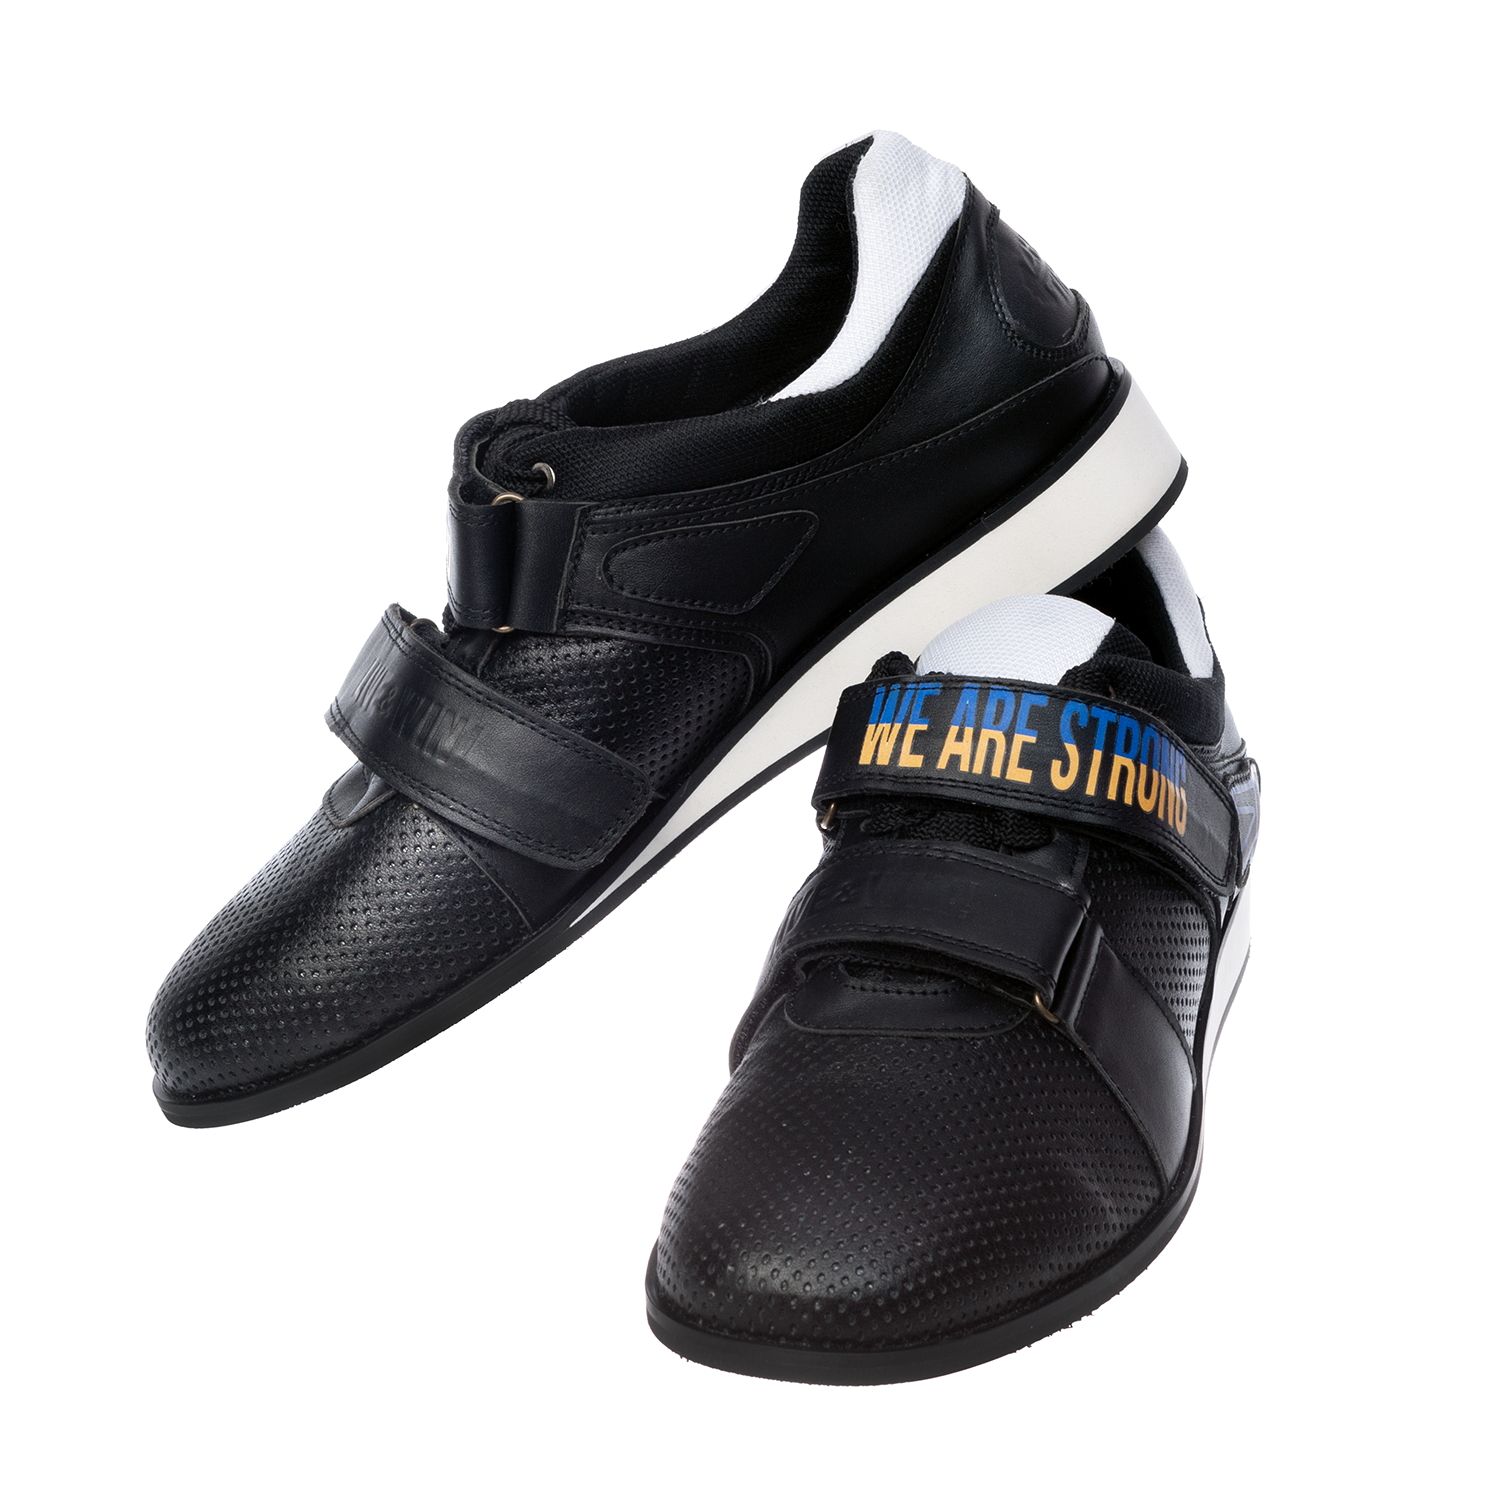 Weightlifting shoes We are strong, black, size 40 (UKR)